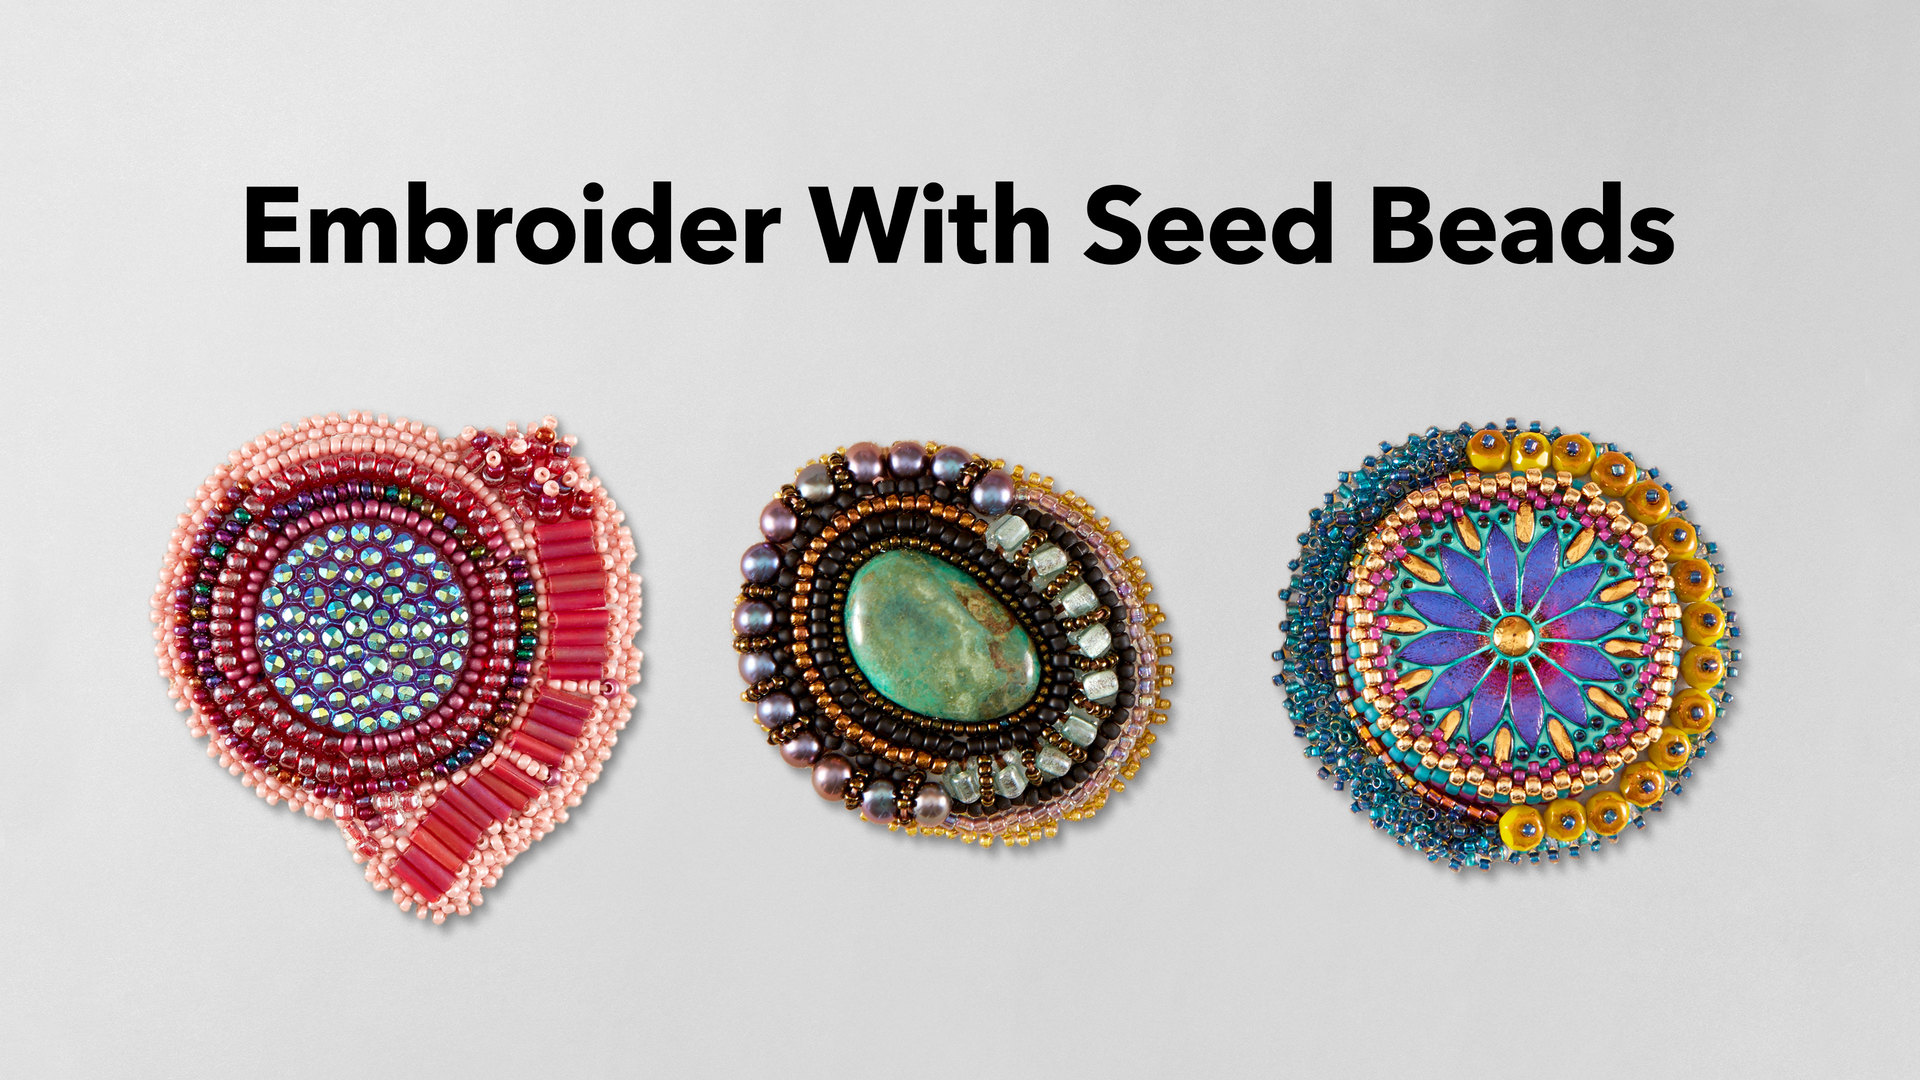 Embroider With Seed Beads